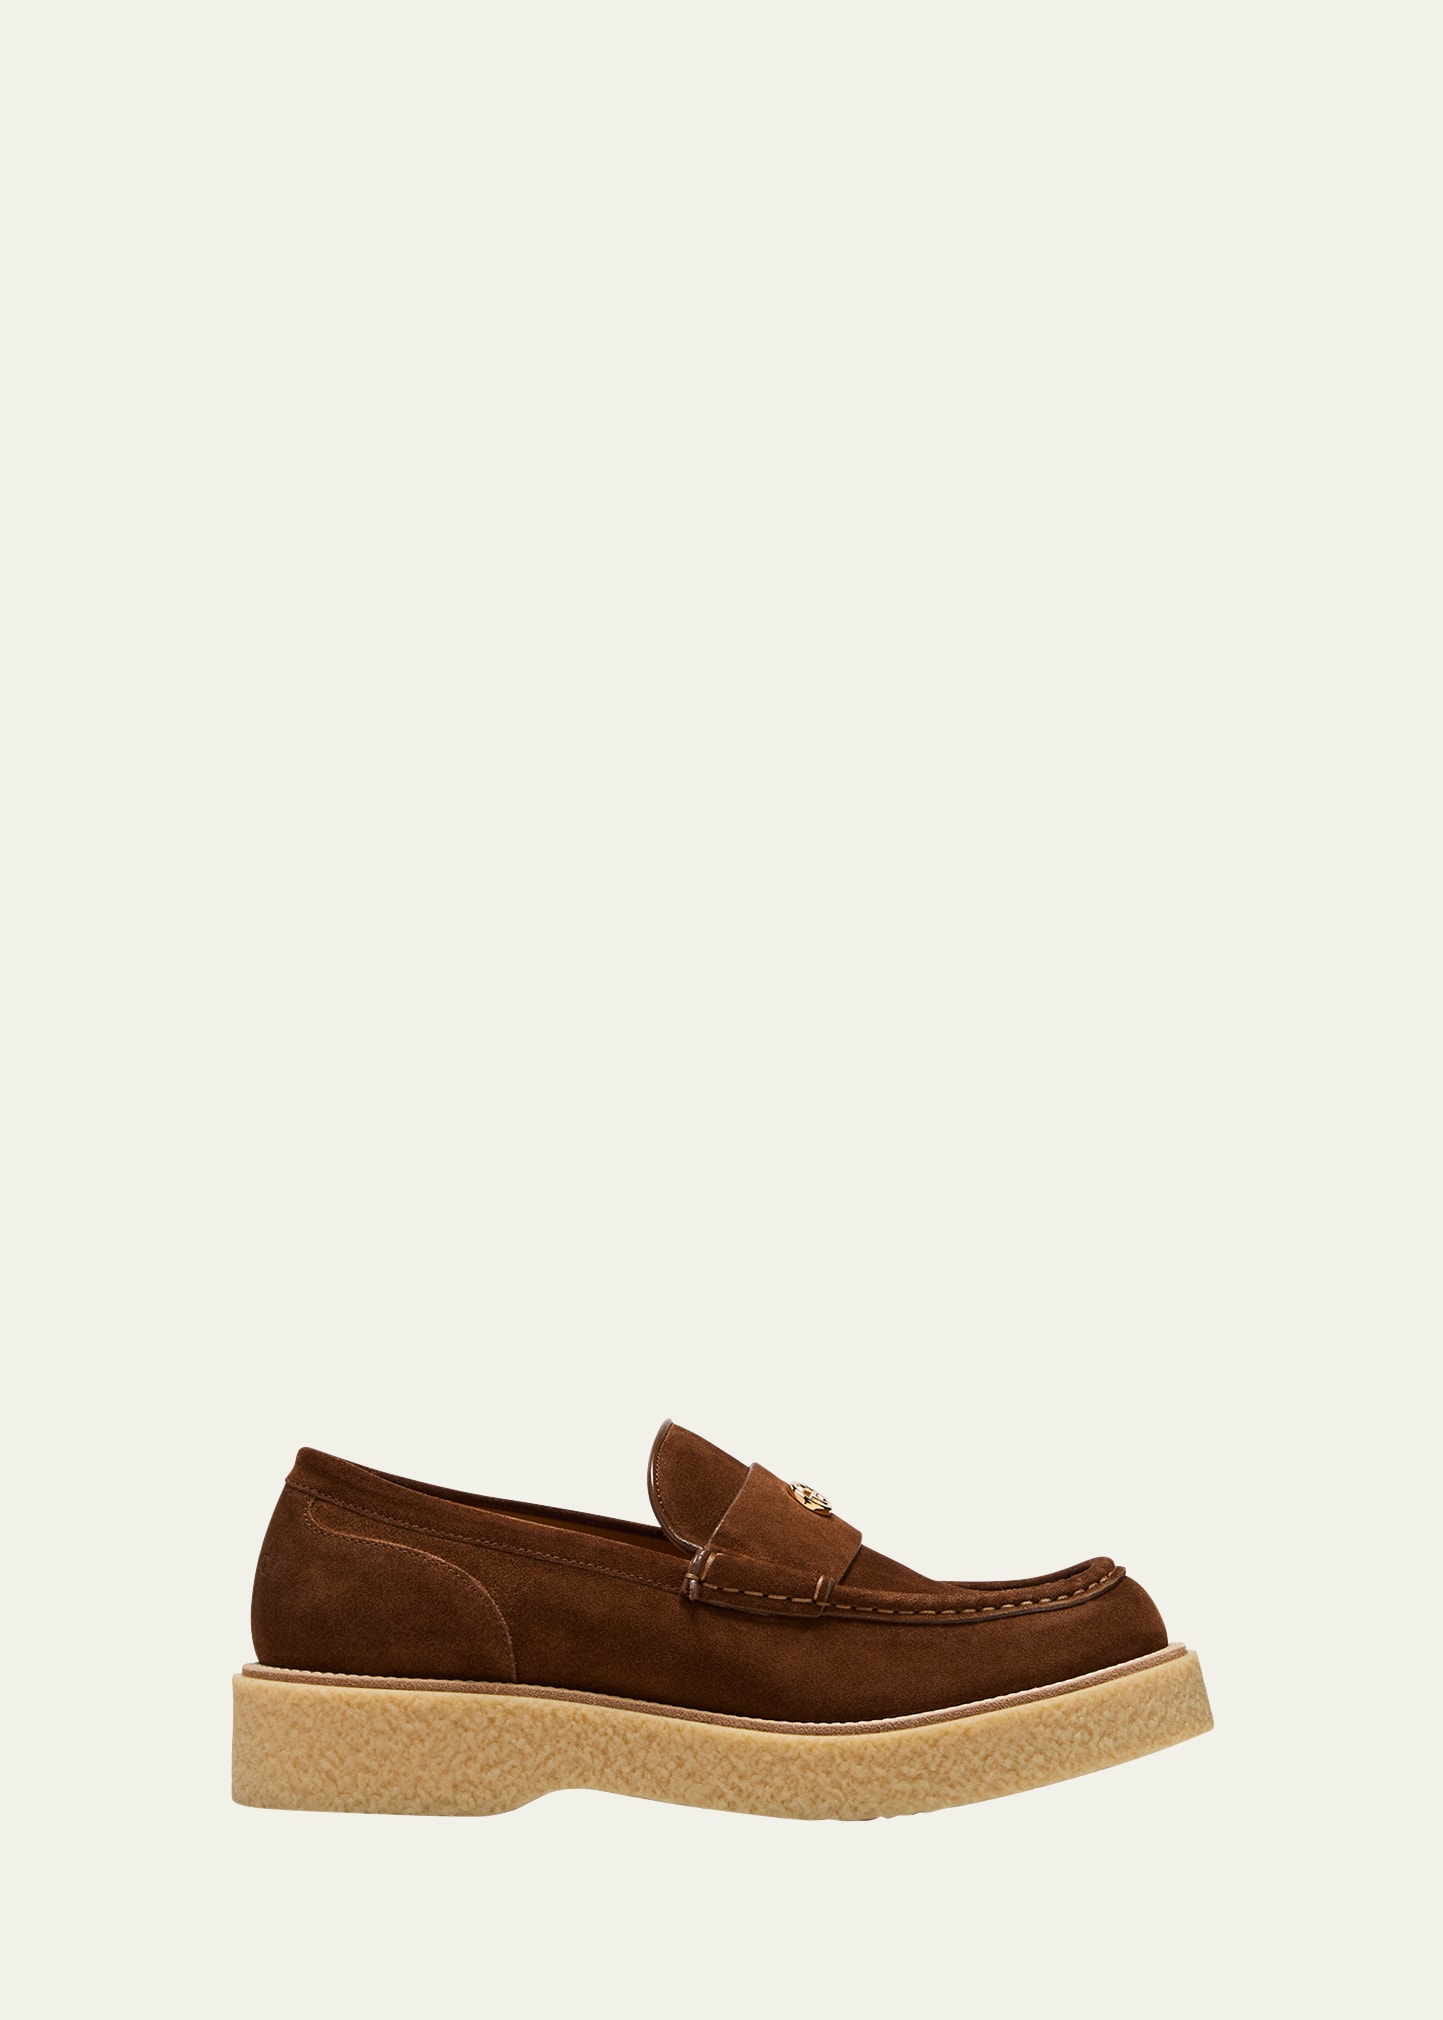 Gucci Menen Suede Loafers In Brown